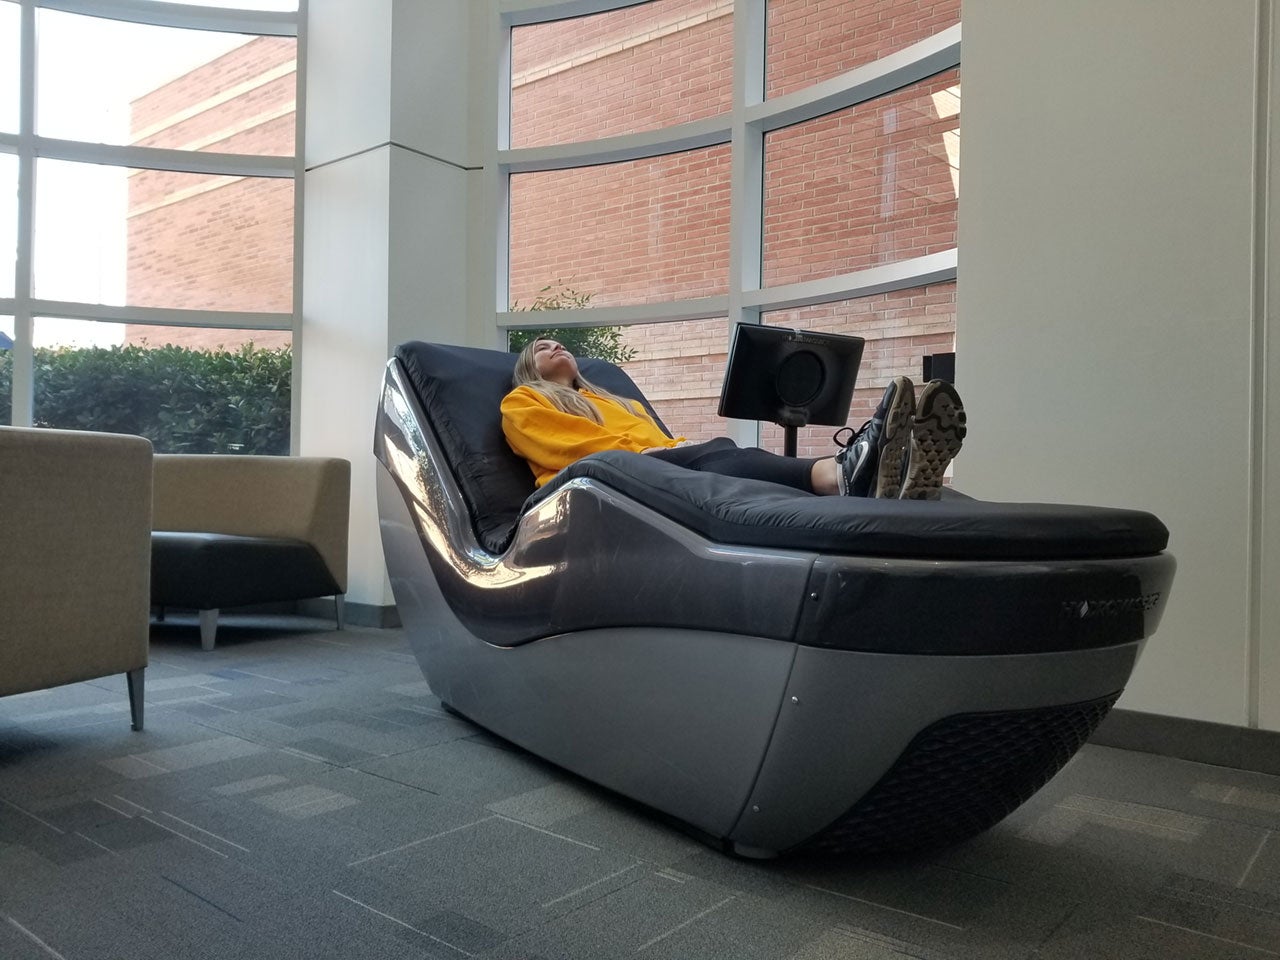 SRC student worker uses hydro massage chair.